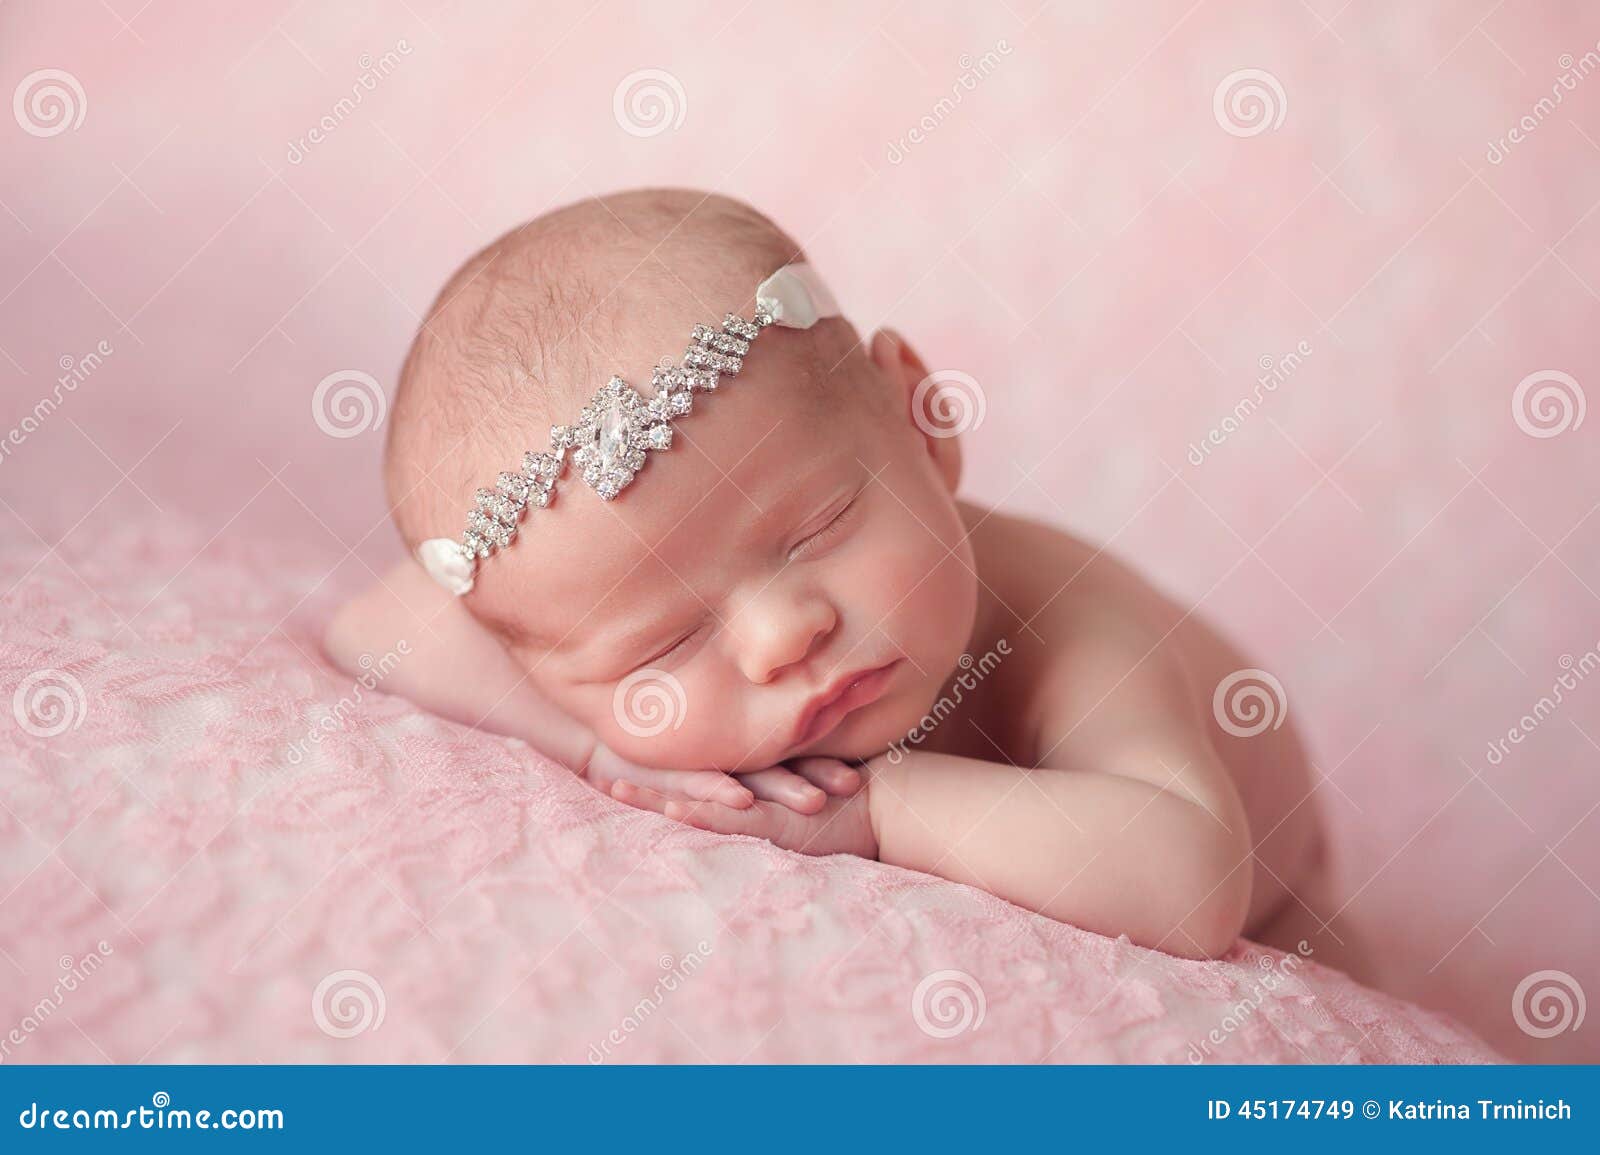 937 New baby headband subscription 65 Portrait of 10 day old newborn baby girl. She is wearing a rhinestonel   